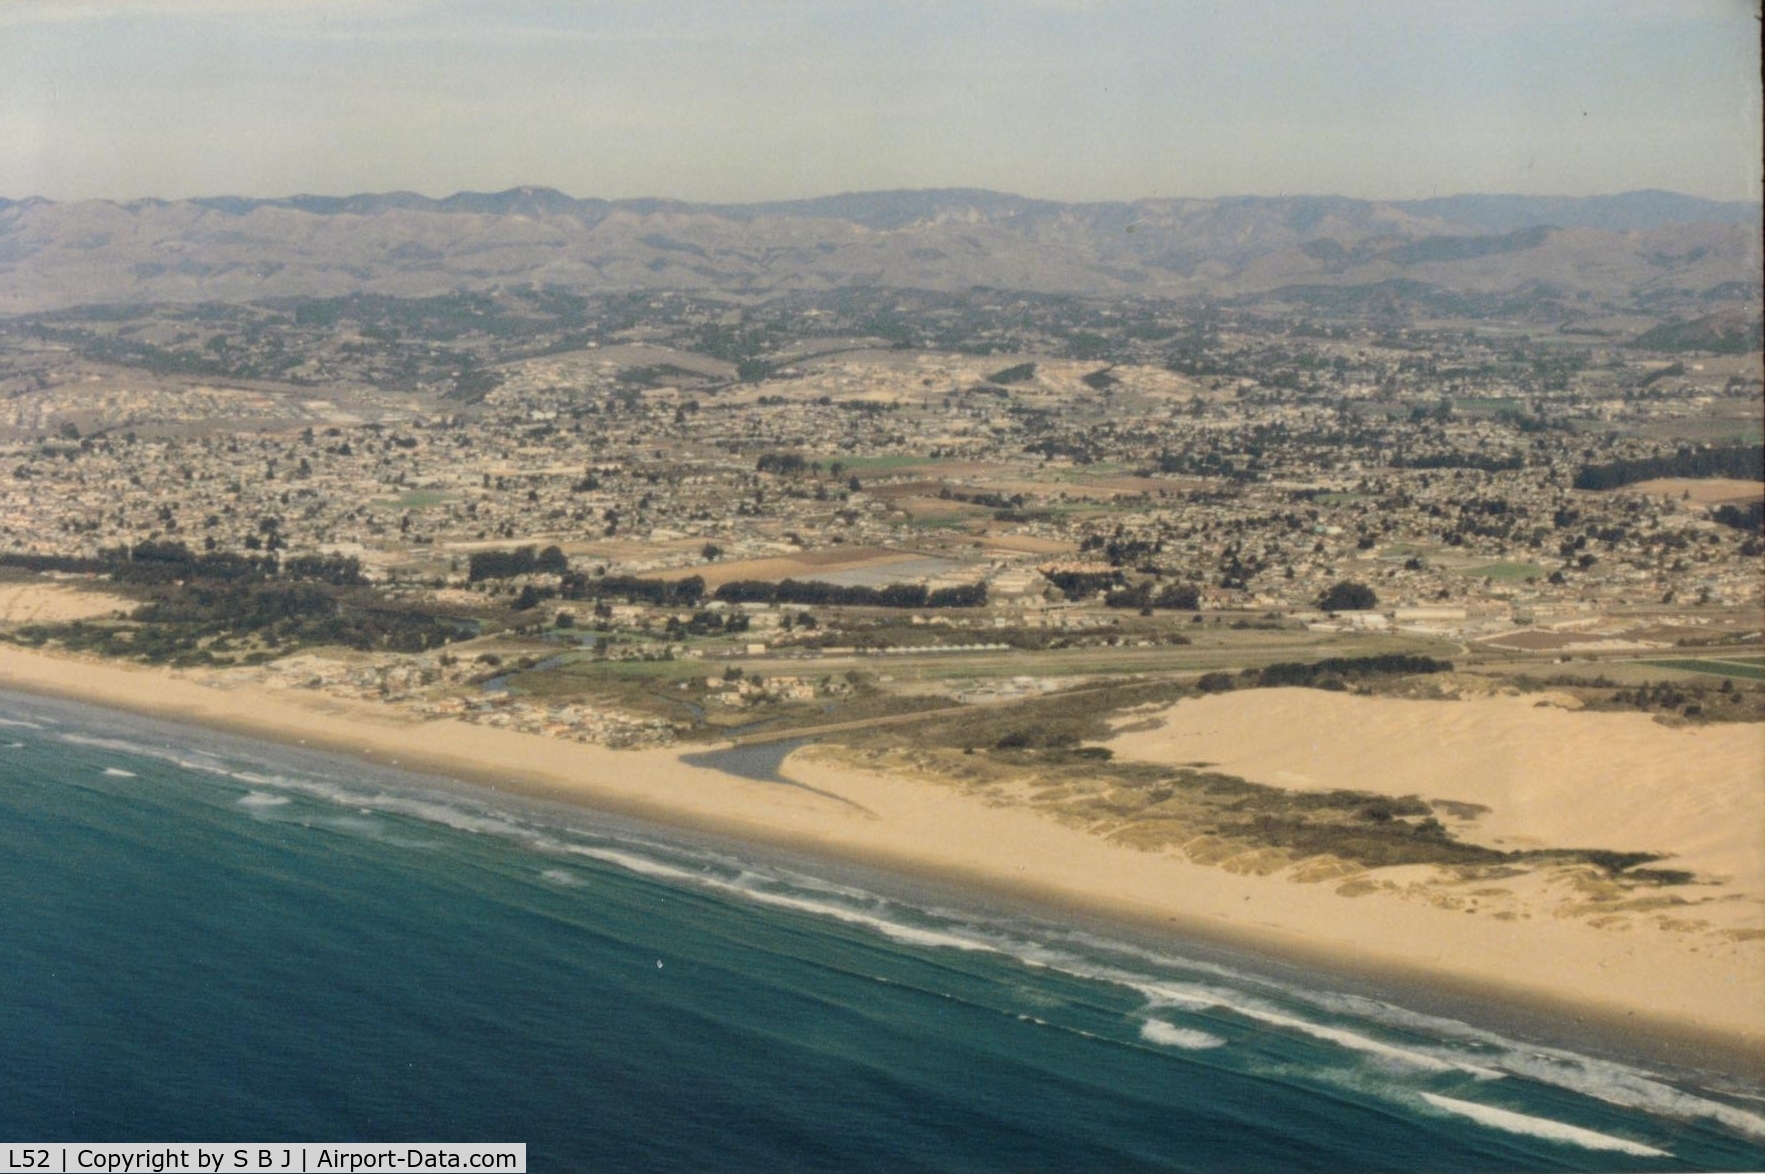 Oceano County Airport (L52) - Oceano as seen in 2002. Short walk to the beach! What a nice location for an airport. View is north.